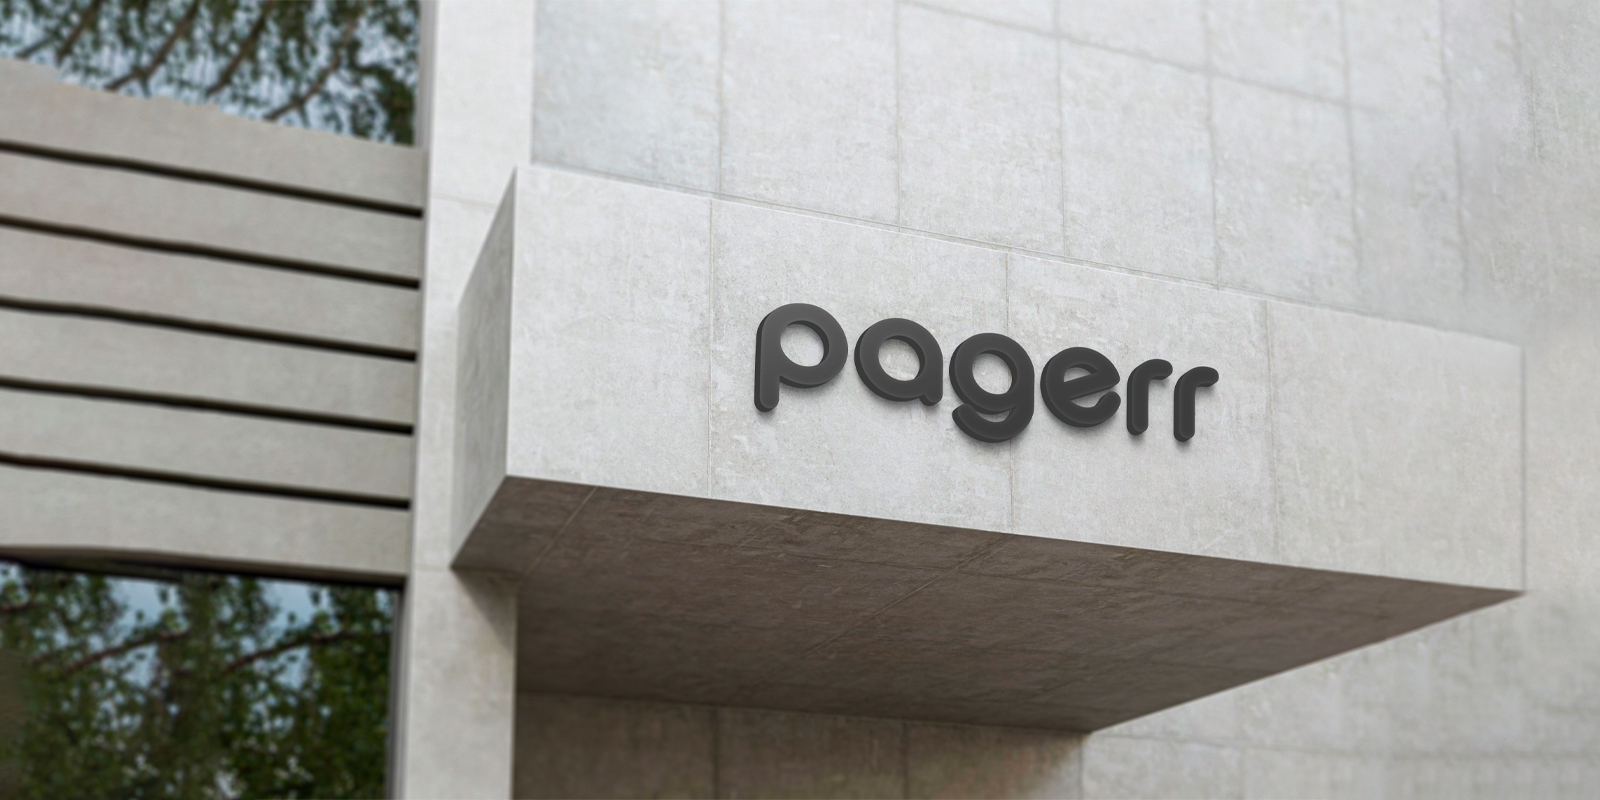 Logo signs in Bucharest - Print with Pagerr